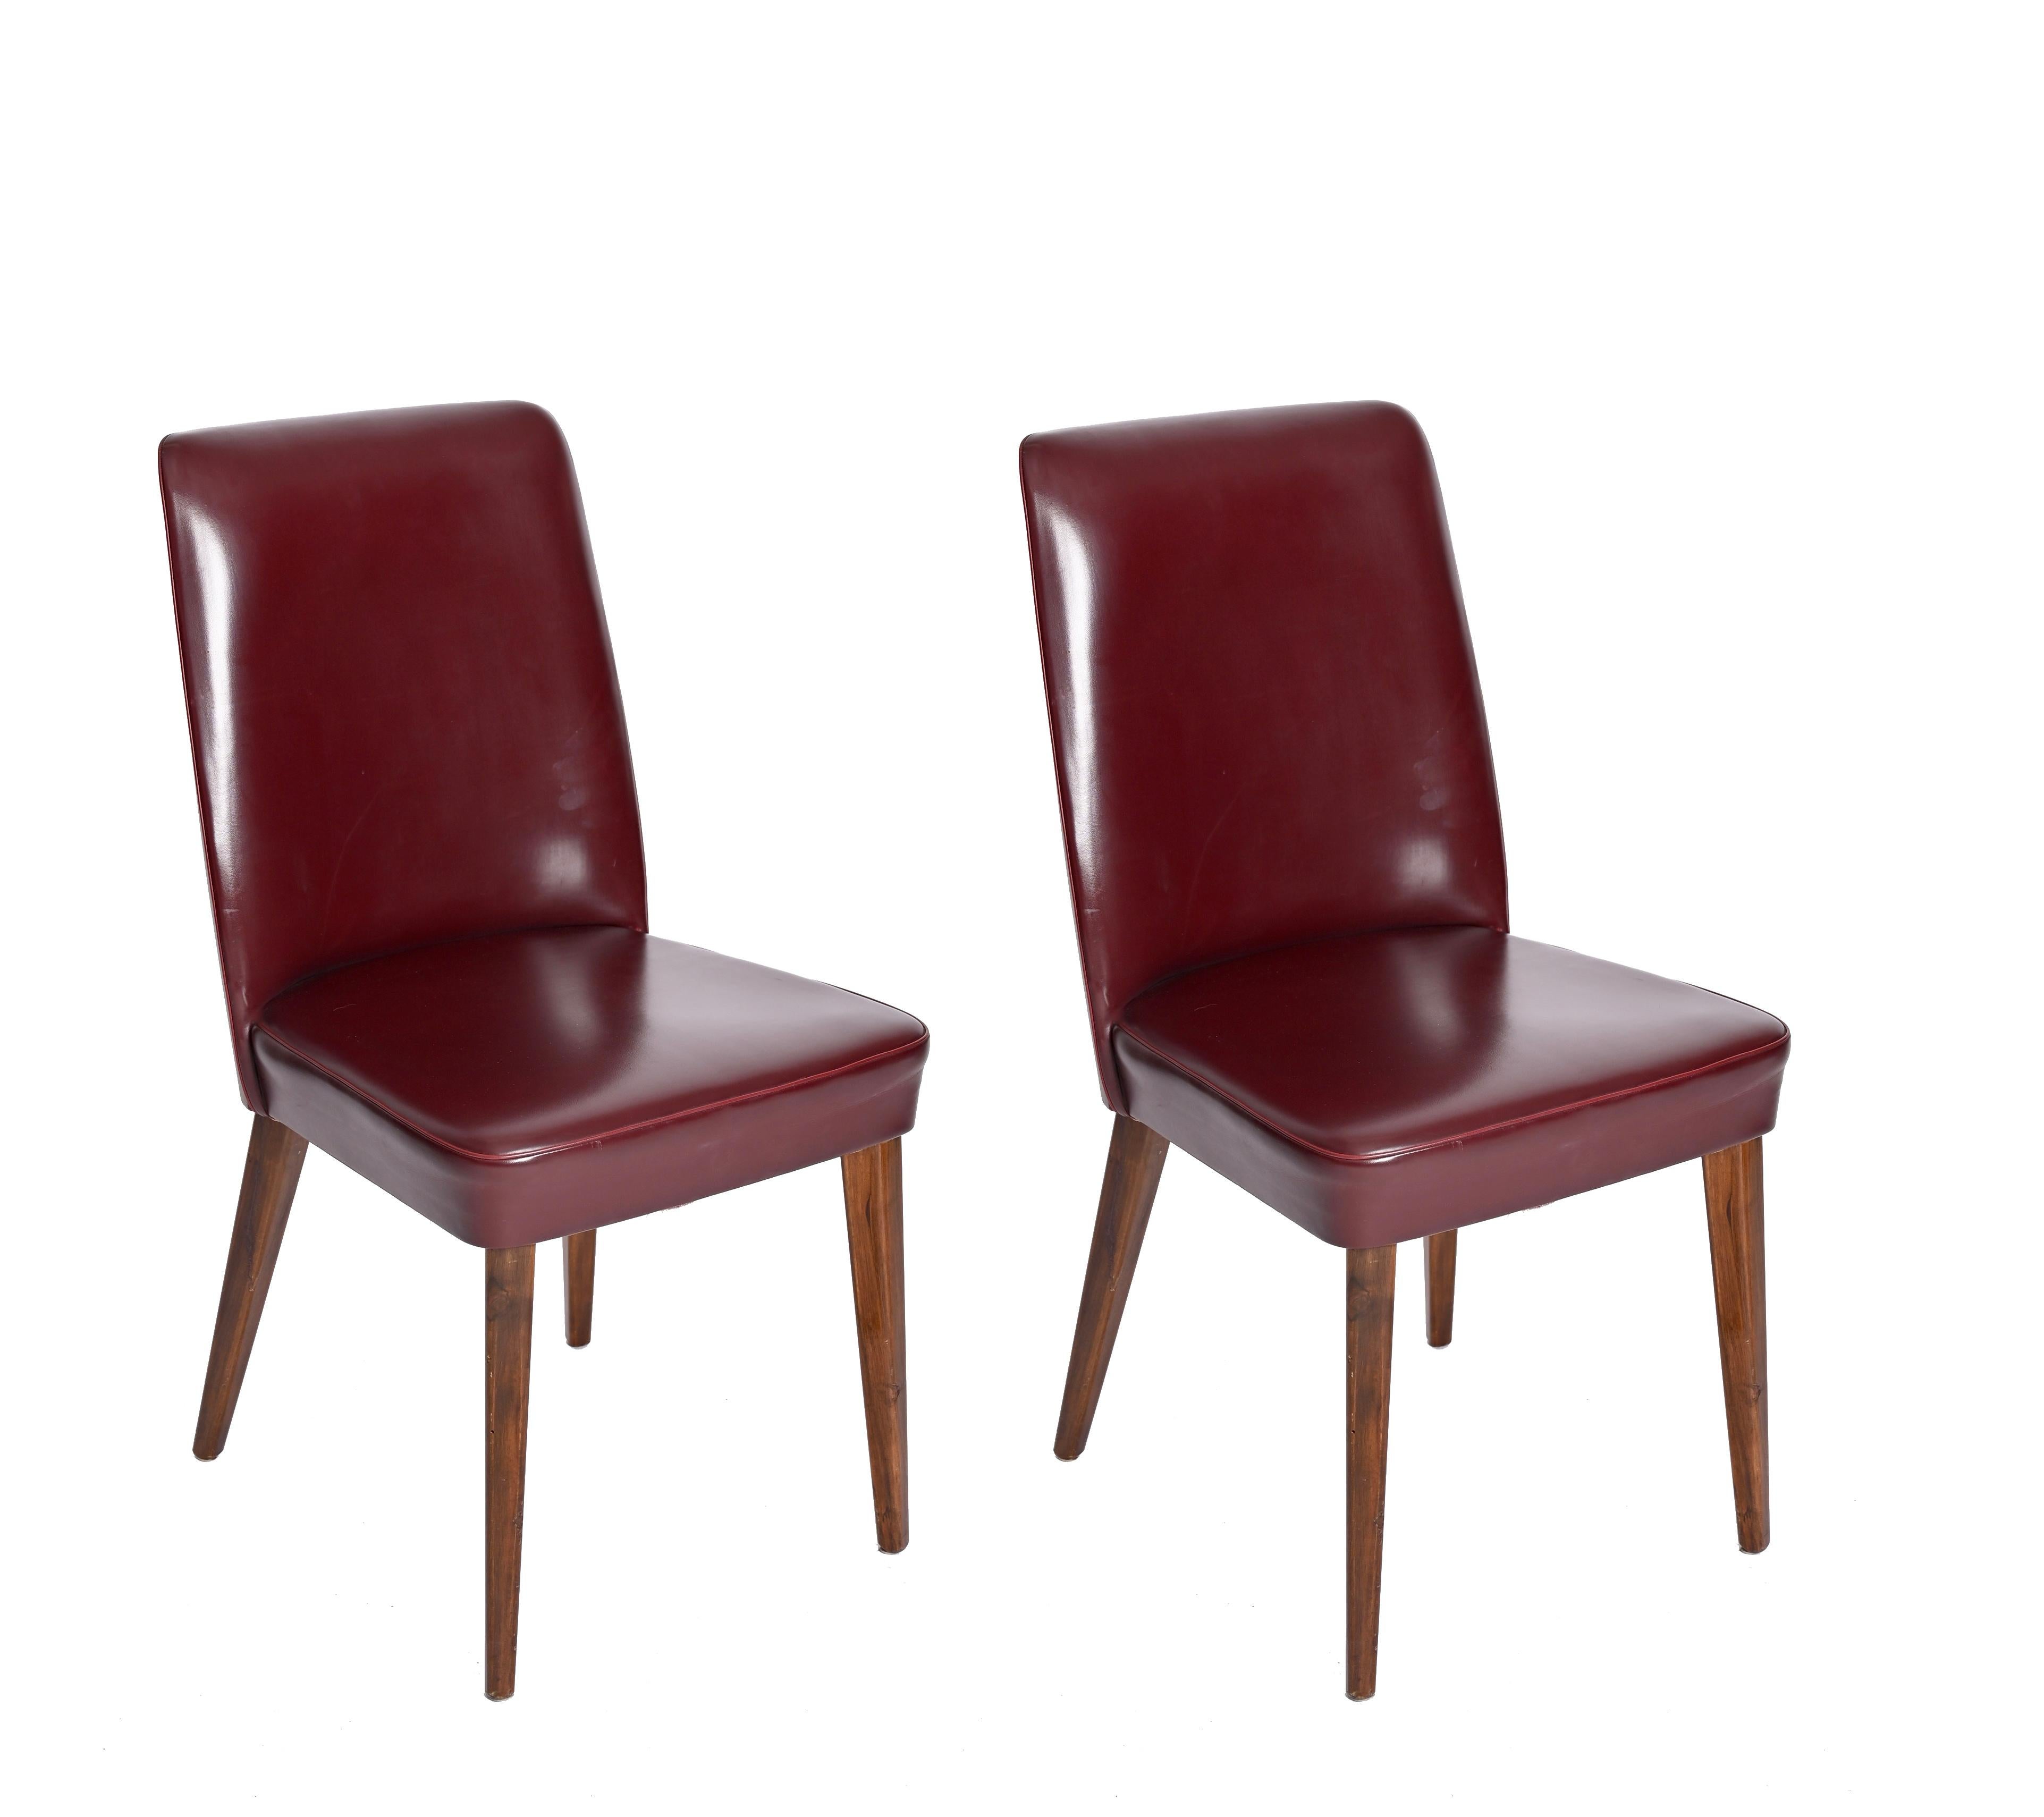 Pair of Bordeaux Leather Chairs by Anonima Castelli, Italy, 1950s For Sale 5